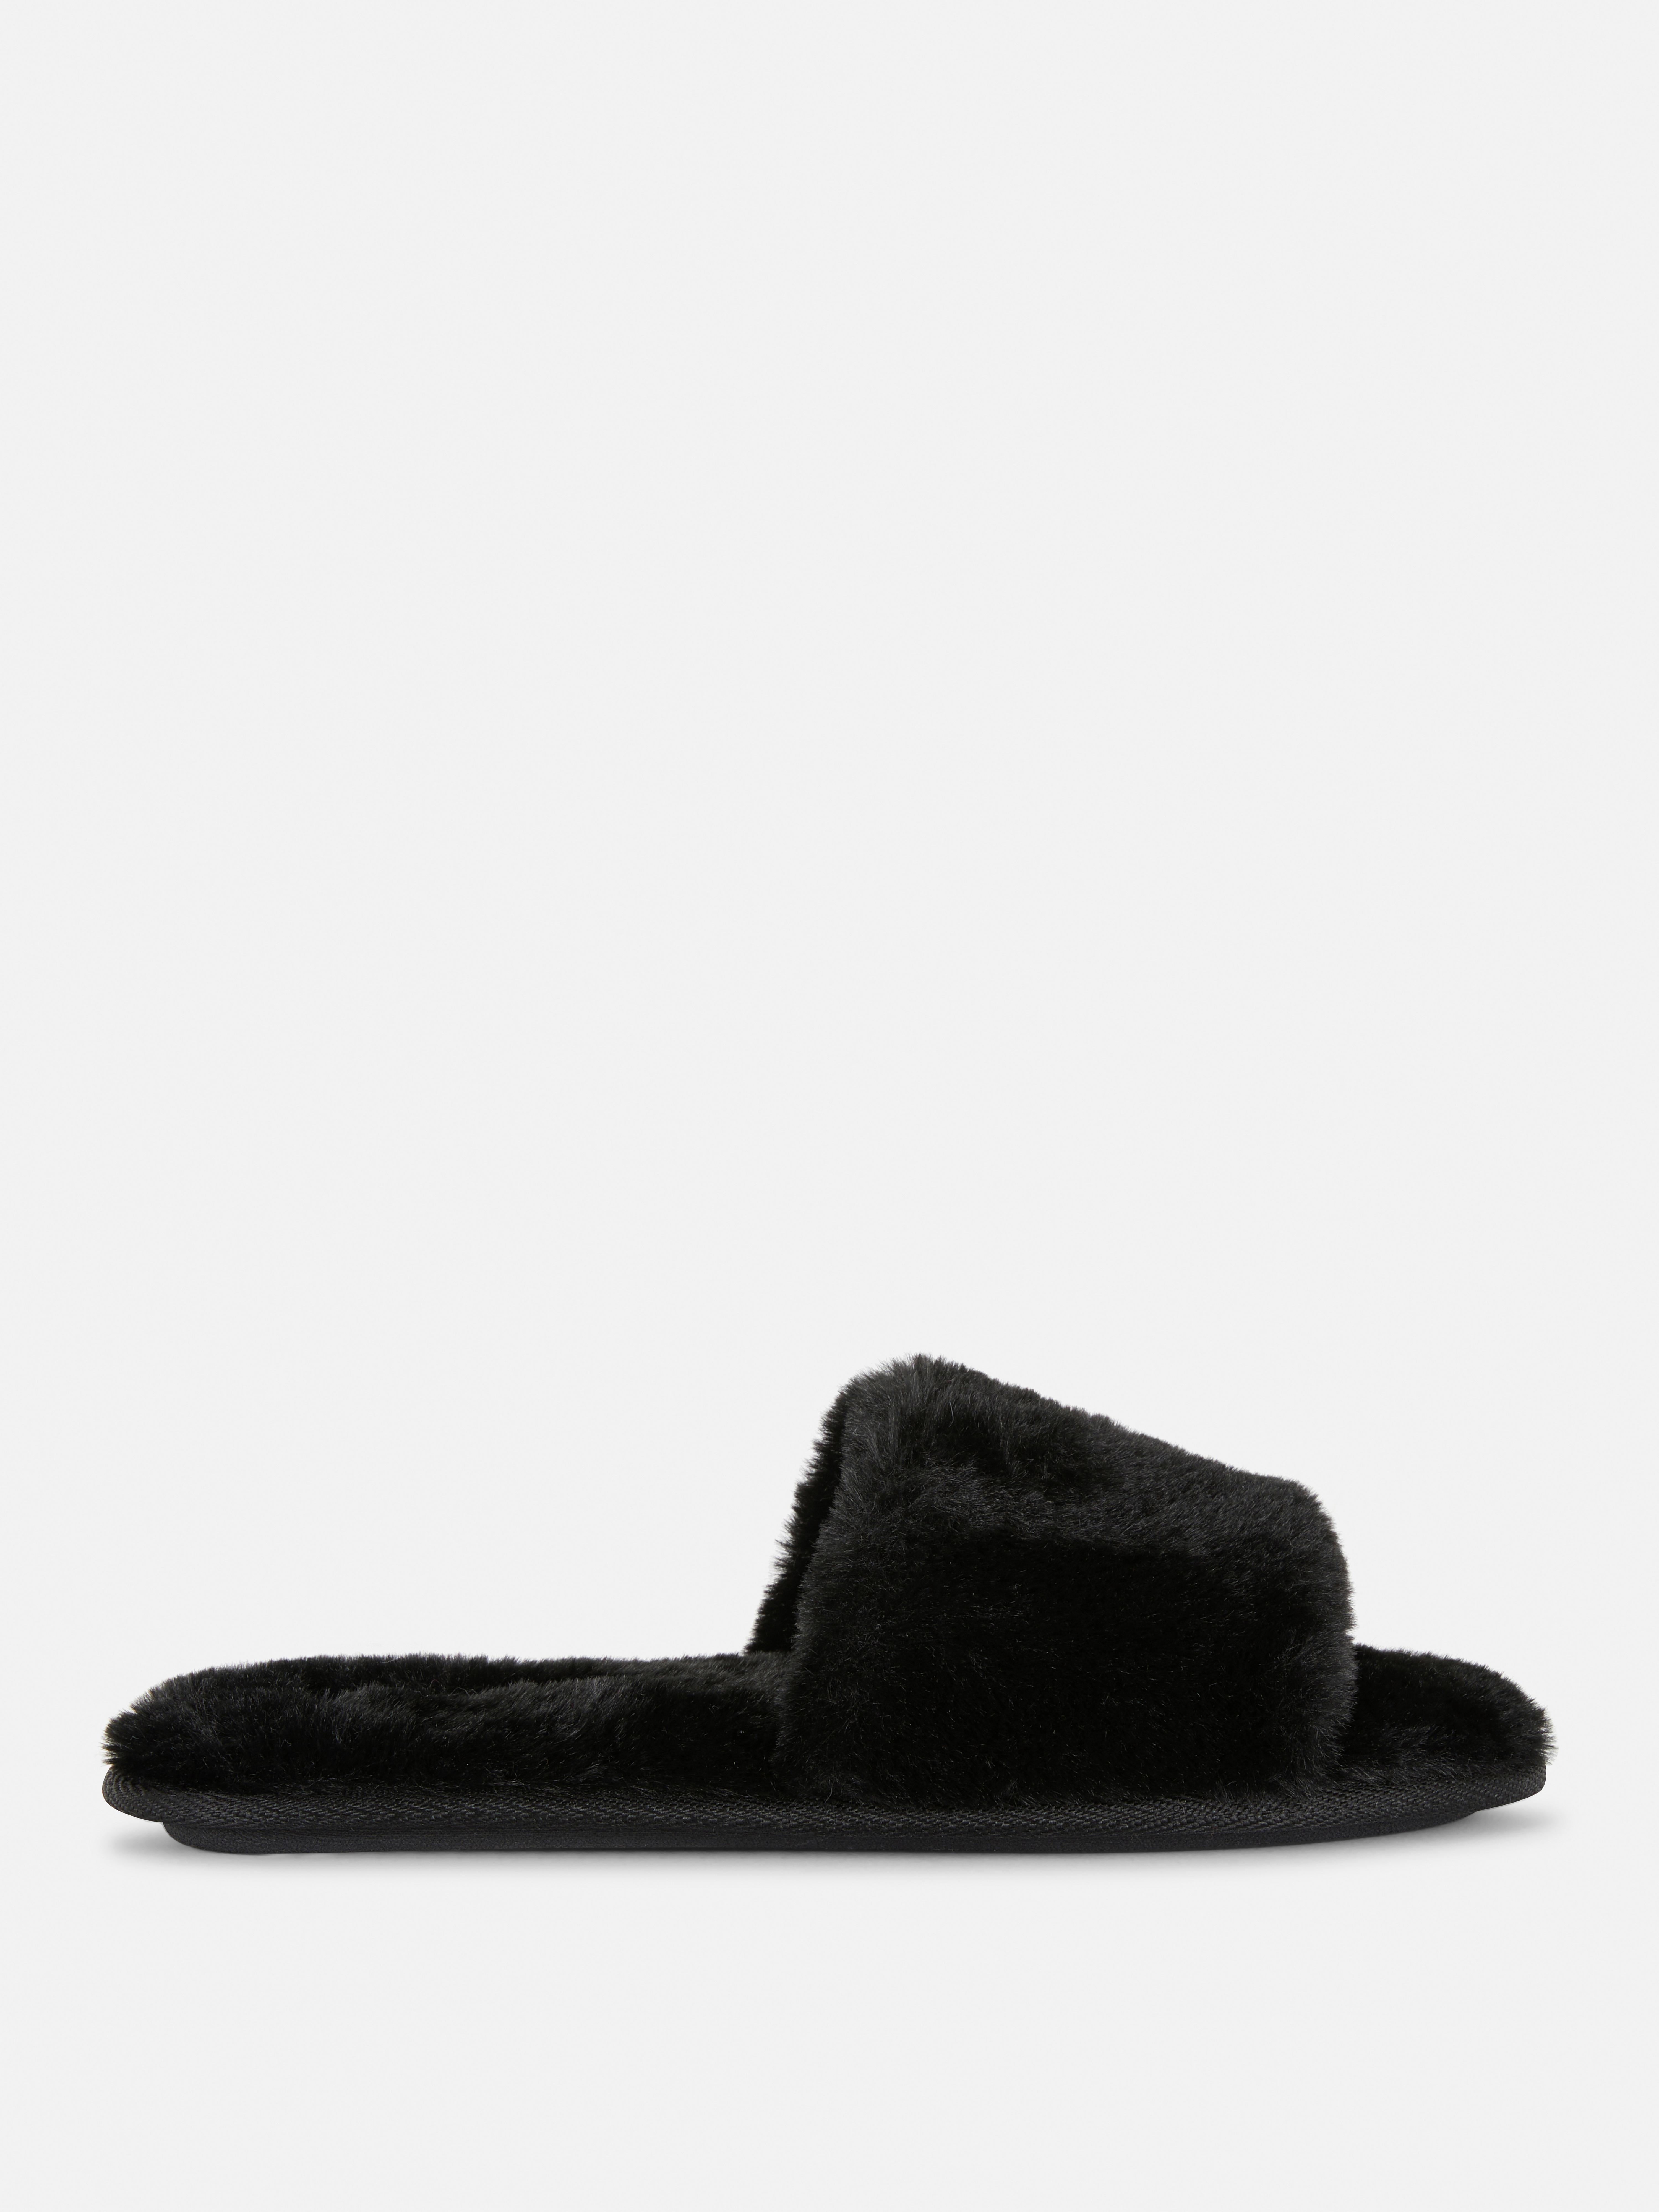 Women's Slippers | Fluffy, Boots & Mule Slippers | Primark